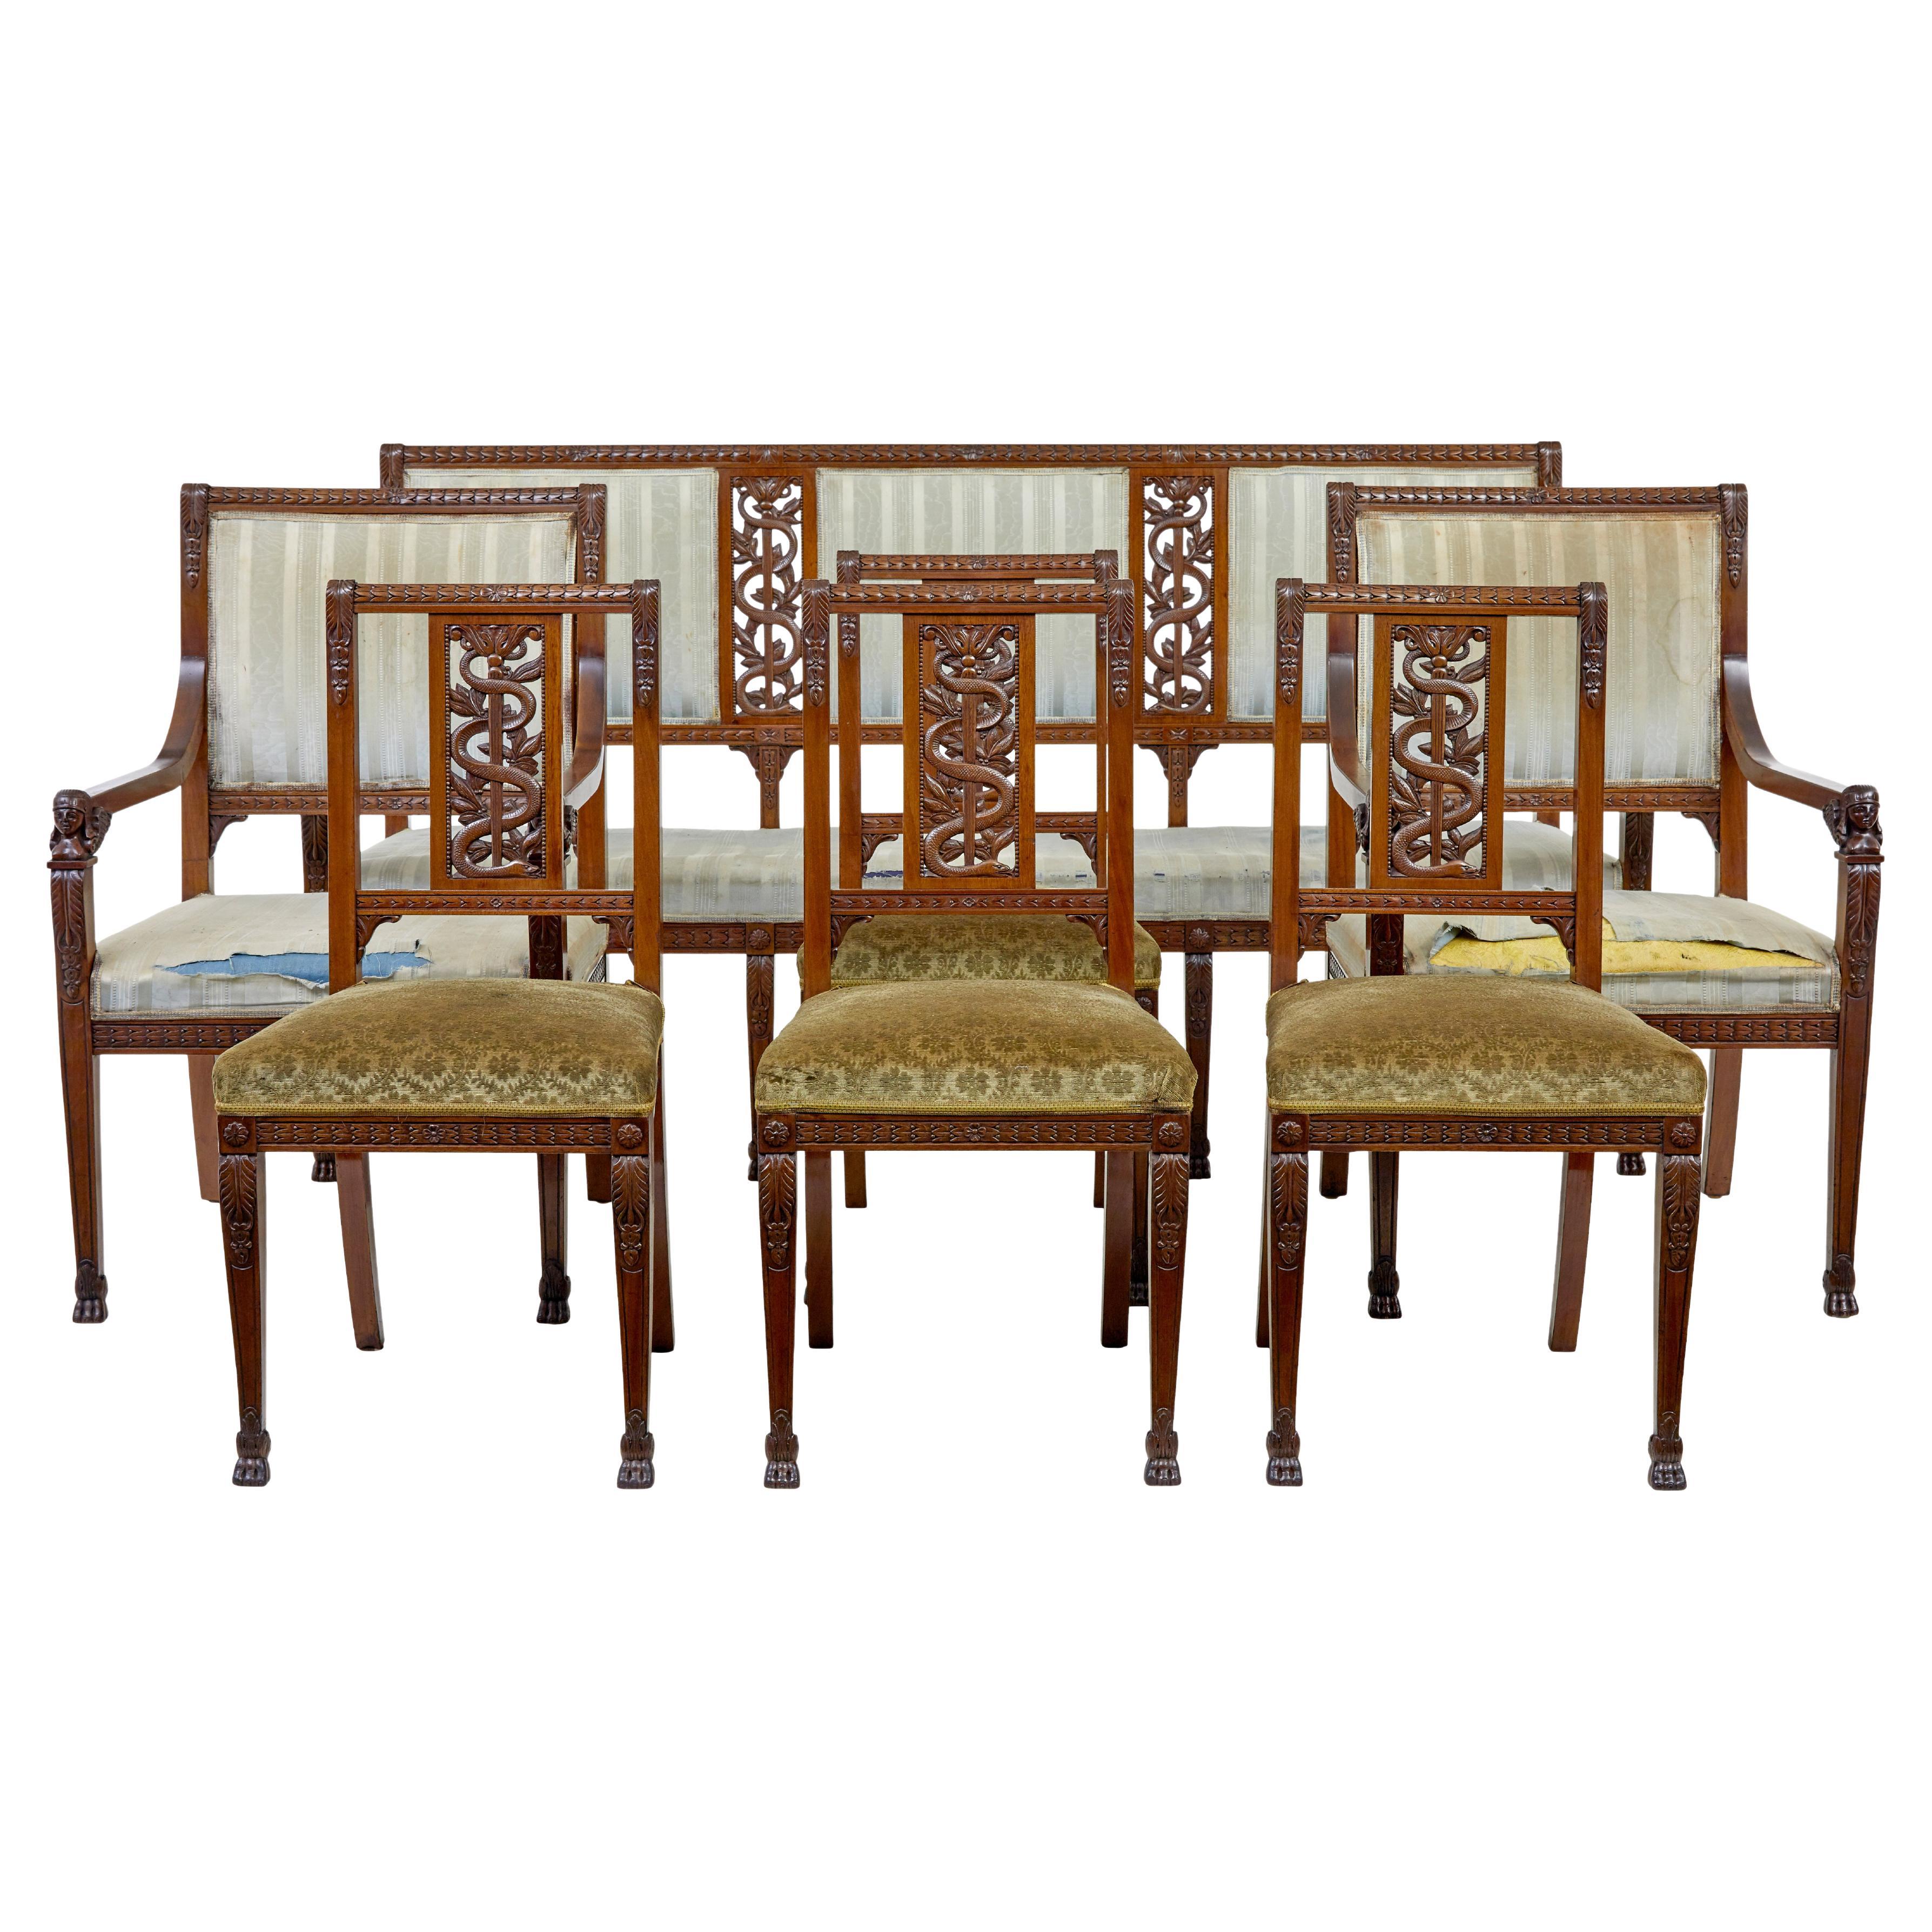 Early 20th century 7 piece carved walnut empire revival suite For Sale